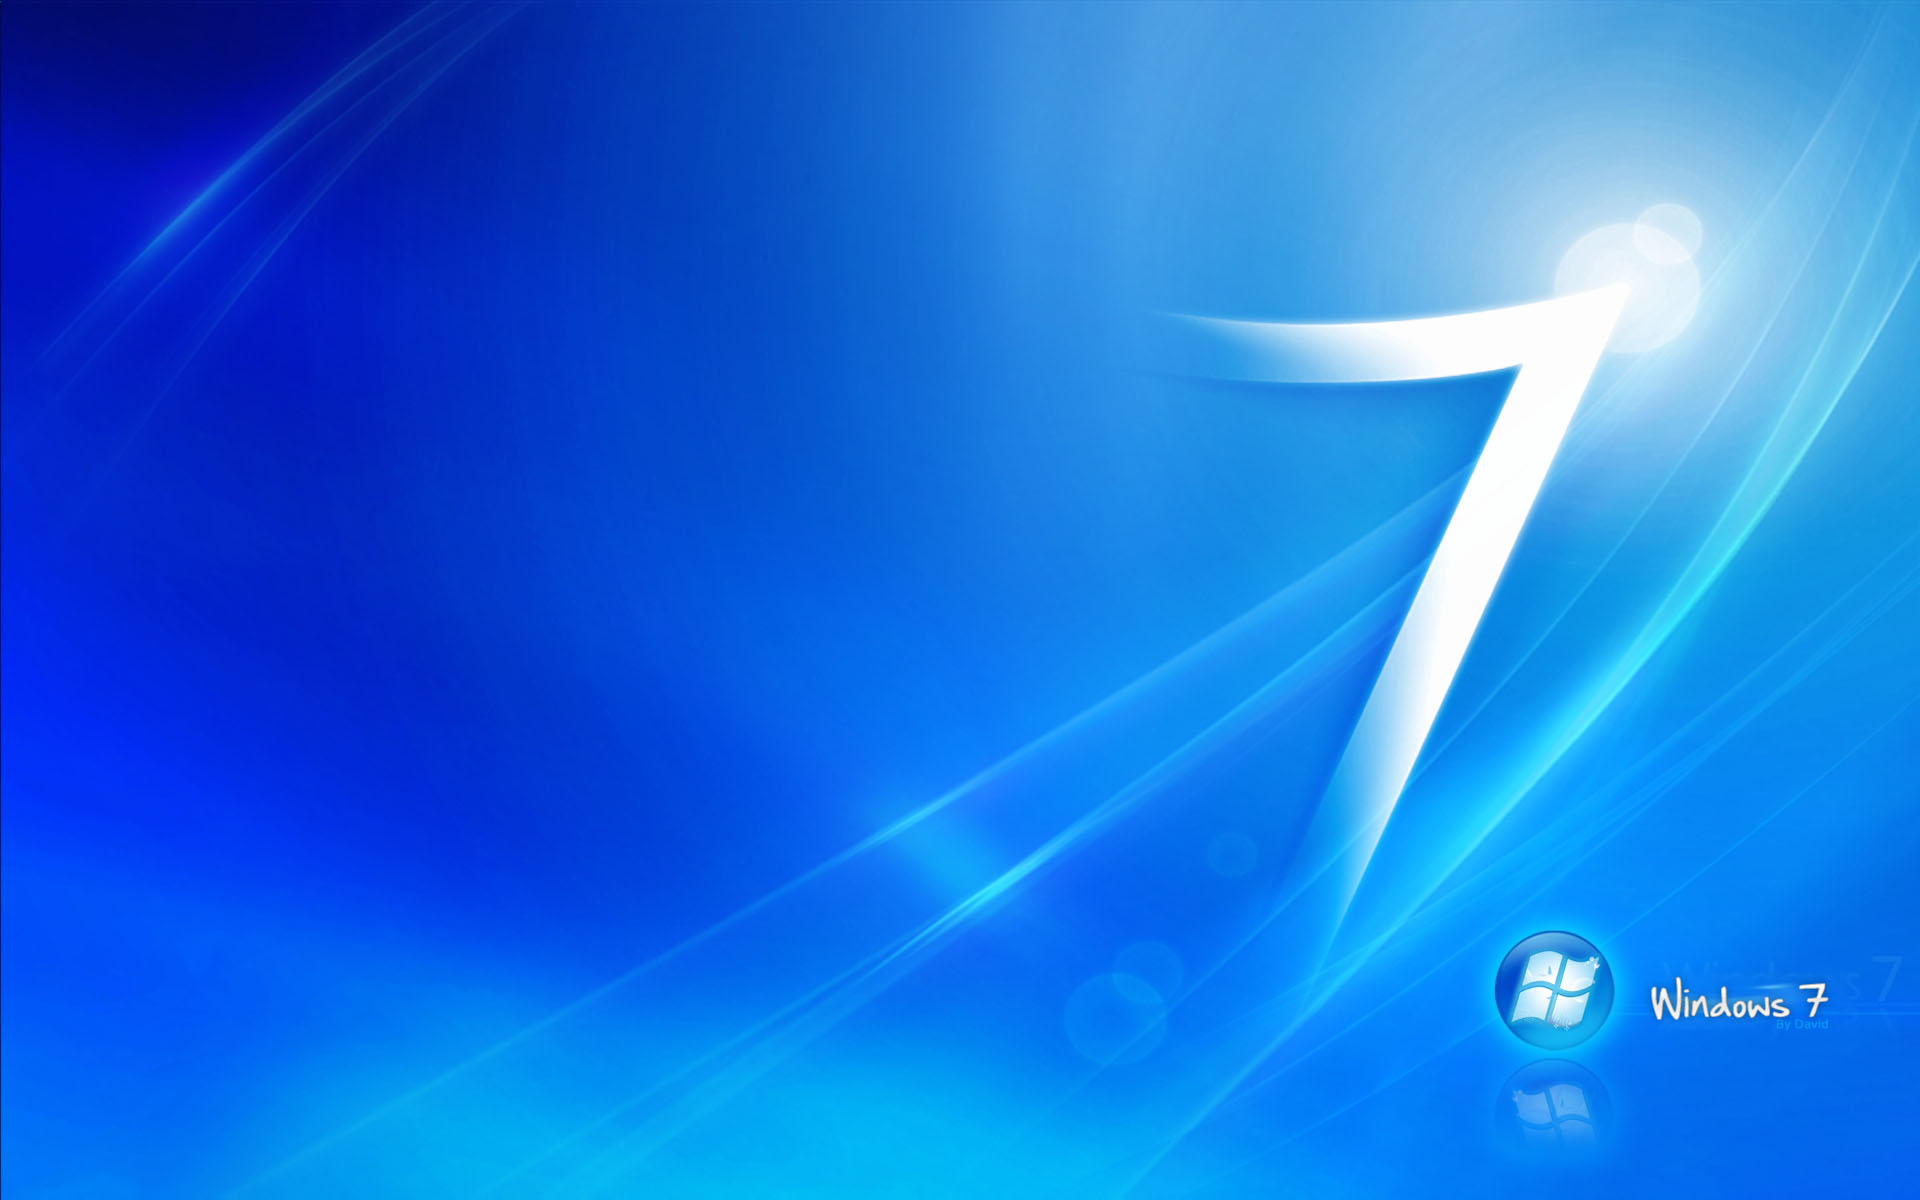 50 Spectacular HQ Windows 7 Wallpapers to Spice Up Your Desktop ...